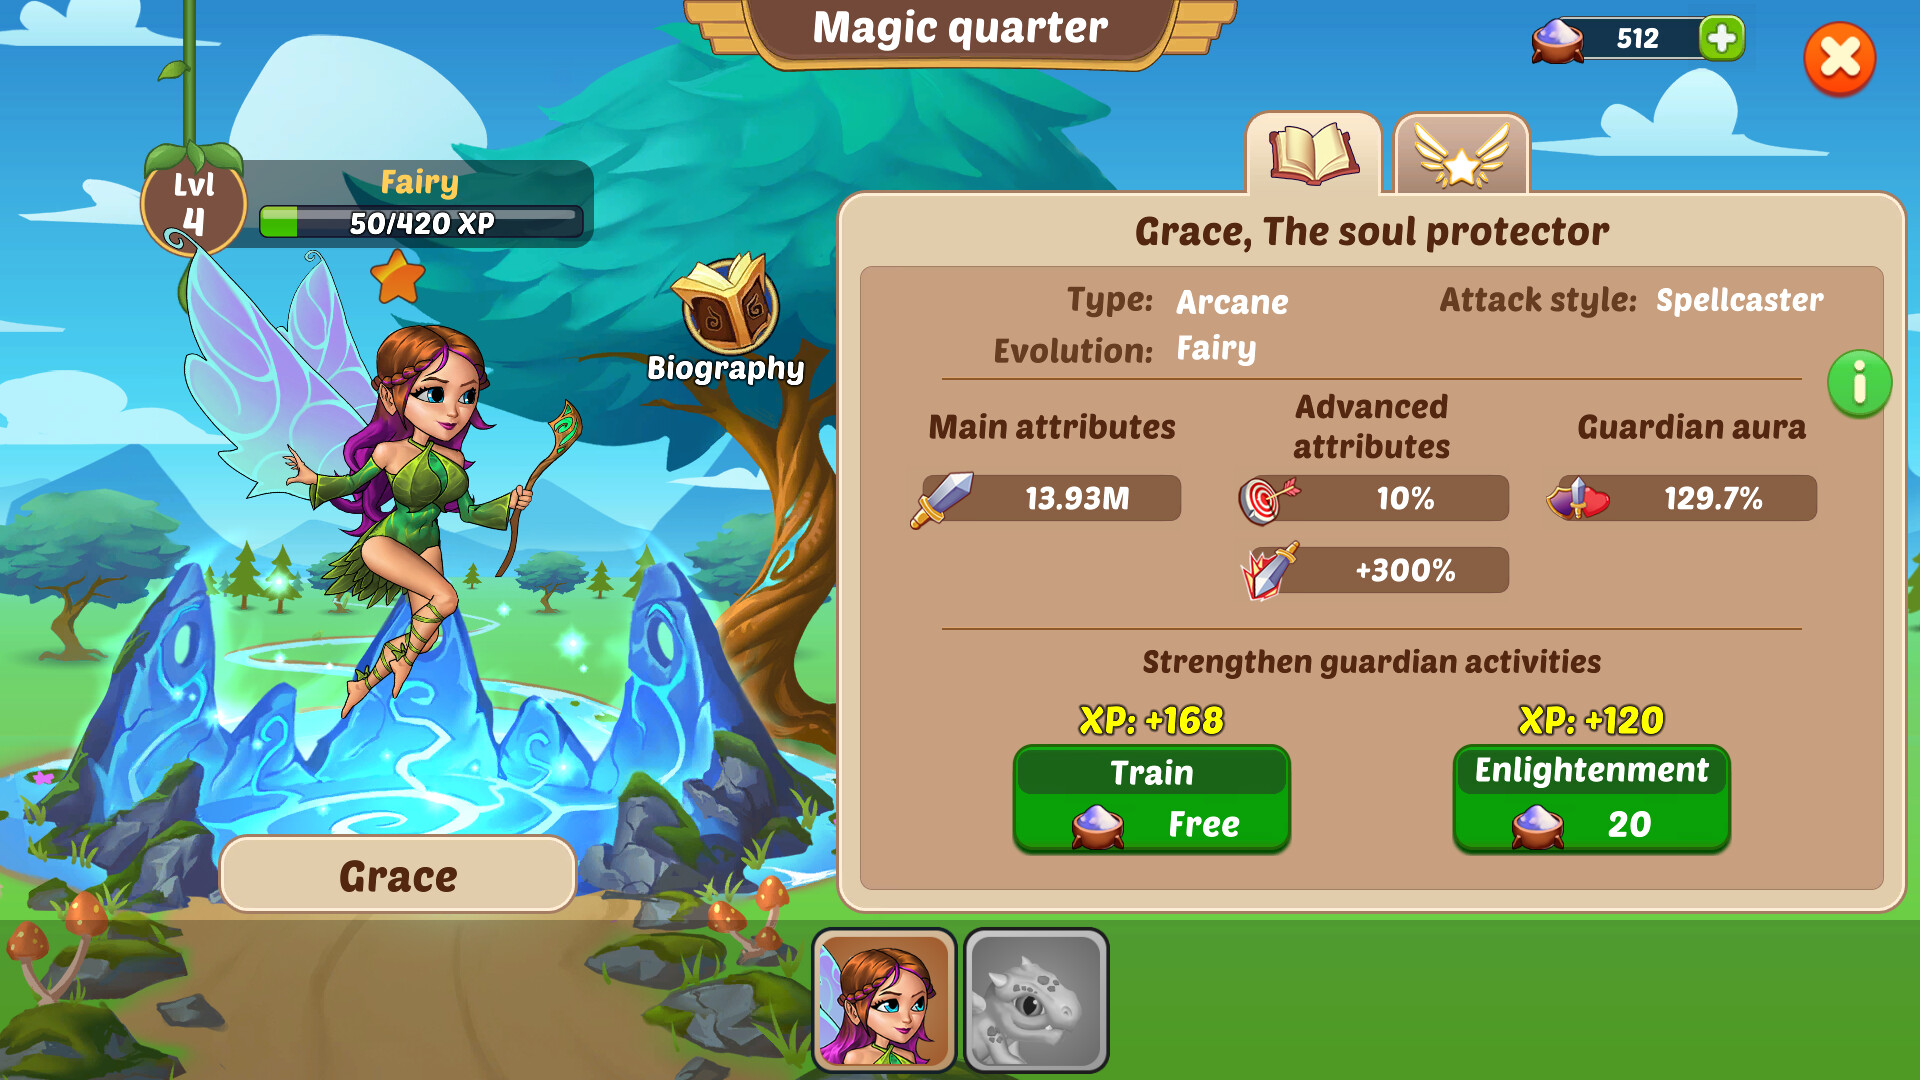 Firestone Online Idle RPG download the new version for android